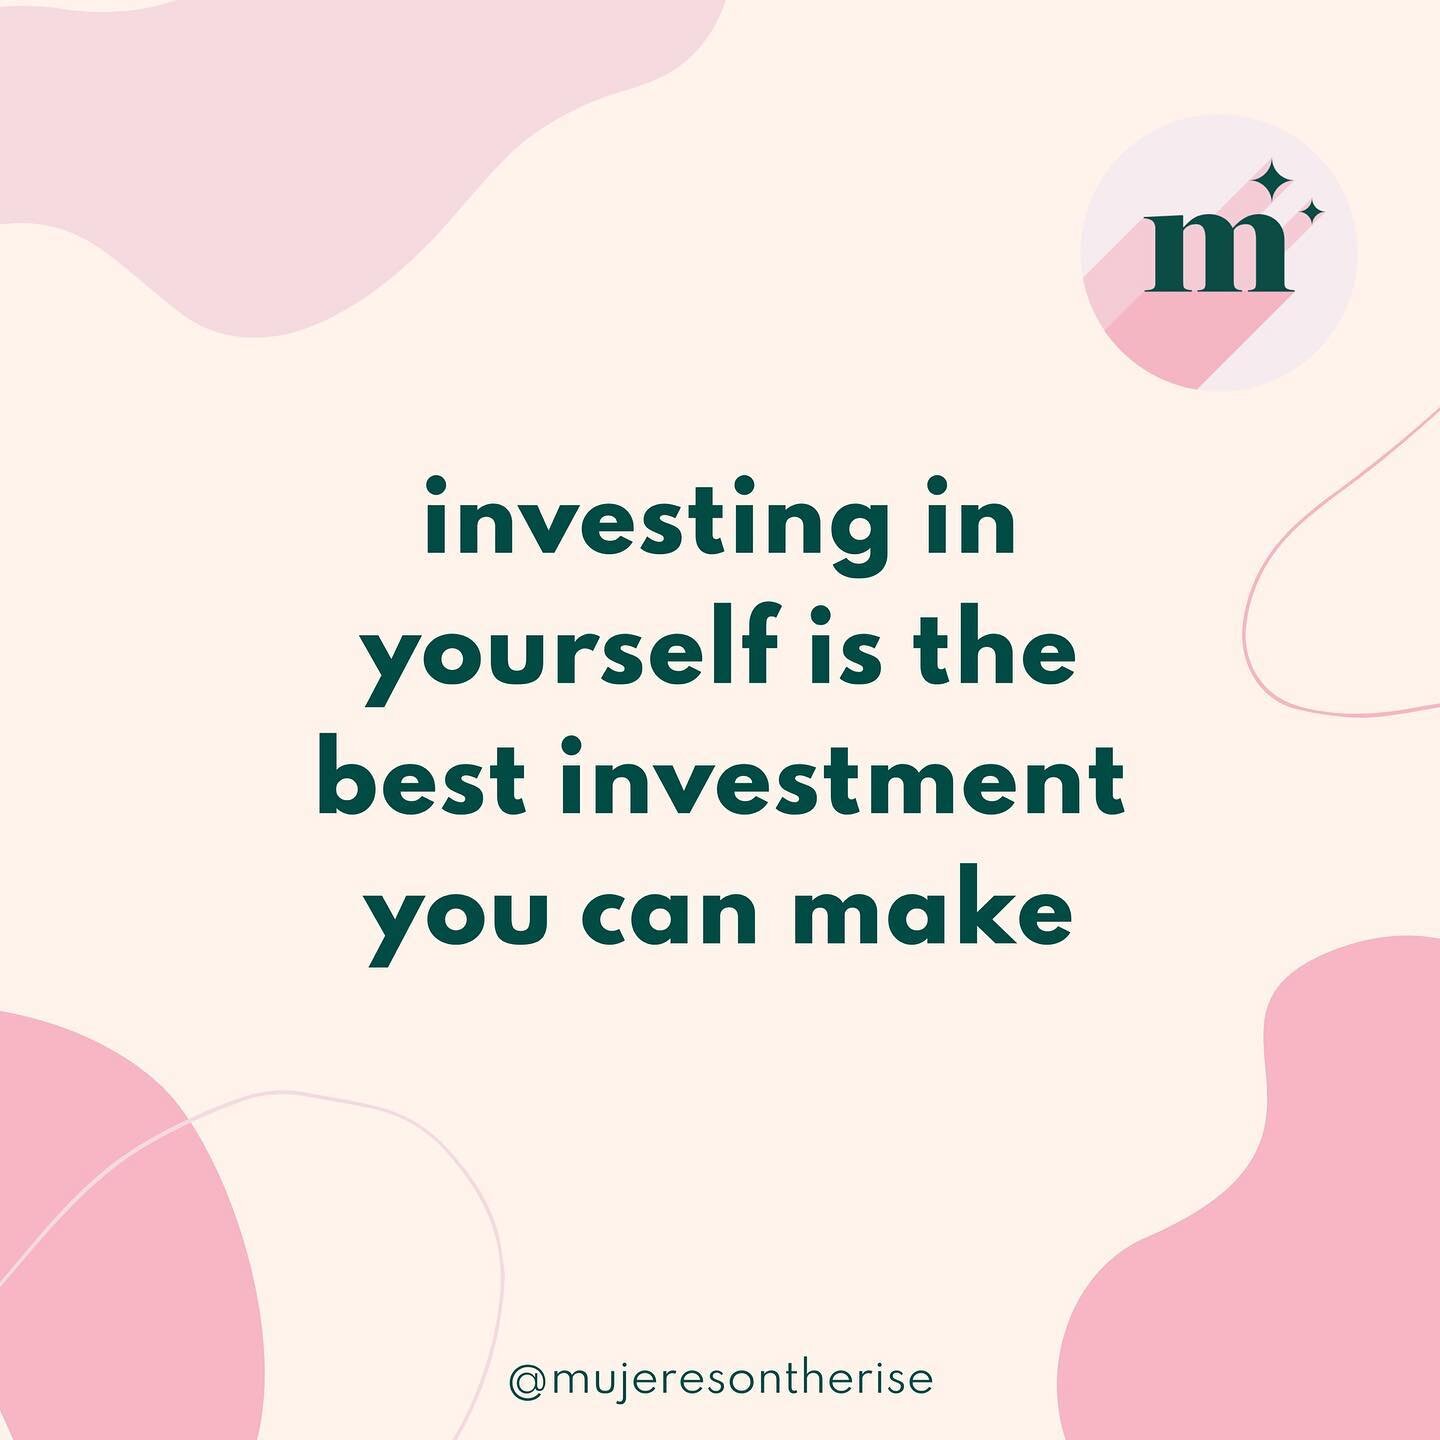 &iexcl;Hola mujeres! This week we talked all about investing in yourself, why it matters, and why it&rsquo;s so important.

We hope you found value in what we shared. Pero overall, we want to remind you that investing in yourself has long-term benefi